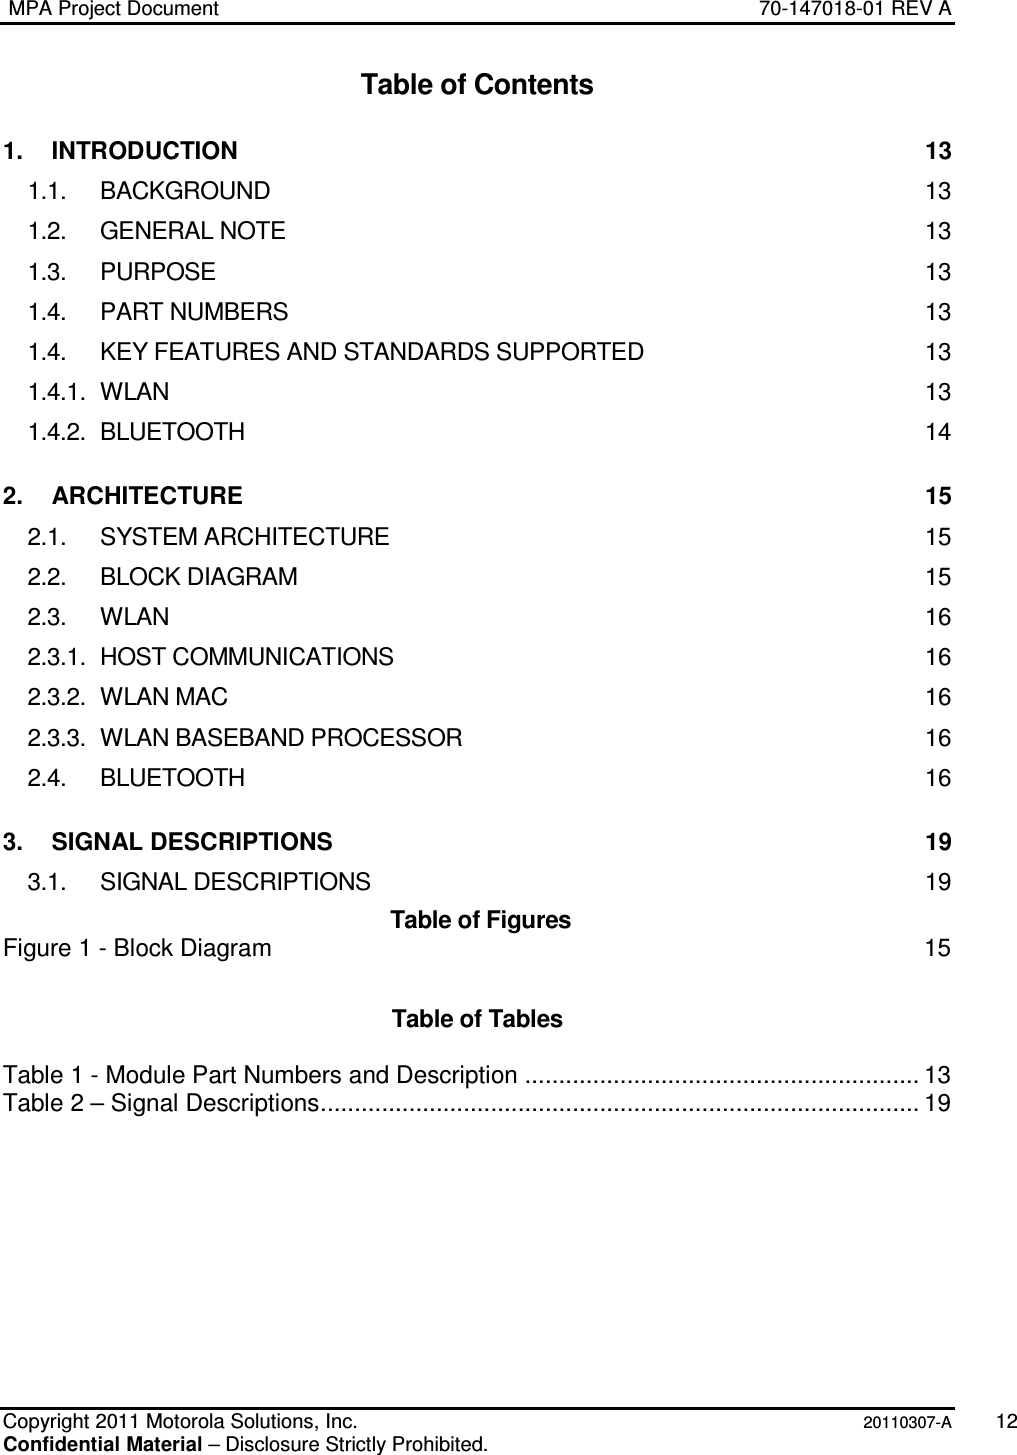  MPA Project Document  70-147018-01 REV A    Copyright 2011 Motorola Solutions, Inc.   20110307-A  12 Confidential Material – Disclosure Strictly Prohibited. Table of Contents 1. INTRODUCTION  13 1.1. BACKGROUND  13 1.2. GENERAL NOTE  13 1.3. PURPOSE  13 1.4. PART NUMBERS  13 1.4. KEY FEATURES AND STANDARDS SUPPORTED  13 1.4.1. WLAN  13 1.4.2. BLUETOOTH  14 2. ARCHITECTURE  15 2.1. SYSTEM ARCHITECTURE  15 2.2. BLOCK DIAGRAM  15 2.3. WLAN  16 2.3.1. HOST COMMUNICATIONS  16 2.3.2. WLAN MAC  16 2.3.3. WLAN BASEBAND PROCESSOR  16 2.4. BLUETOOTH  16 3. SIGNAL DESCRIPTIONS  19 3.1. SIGNAL DESCRIPTIONS  19  Table of Figures Figure 1 - Block Diagram  15  Table of Tables  Table 1 - Module Part Numbers and Description .......................................................... 13 Table 2 – Signal Descriptions........................................................................................ 19 